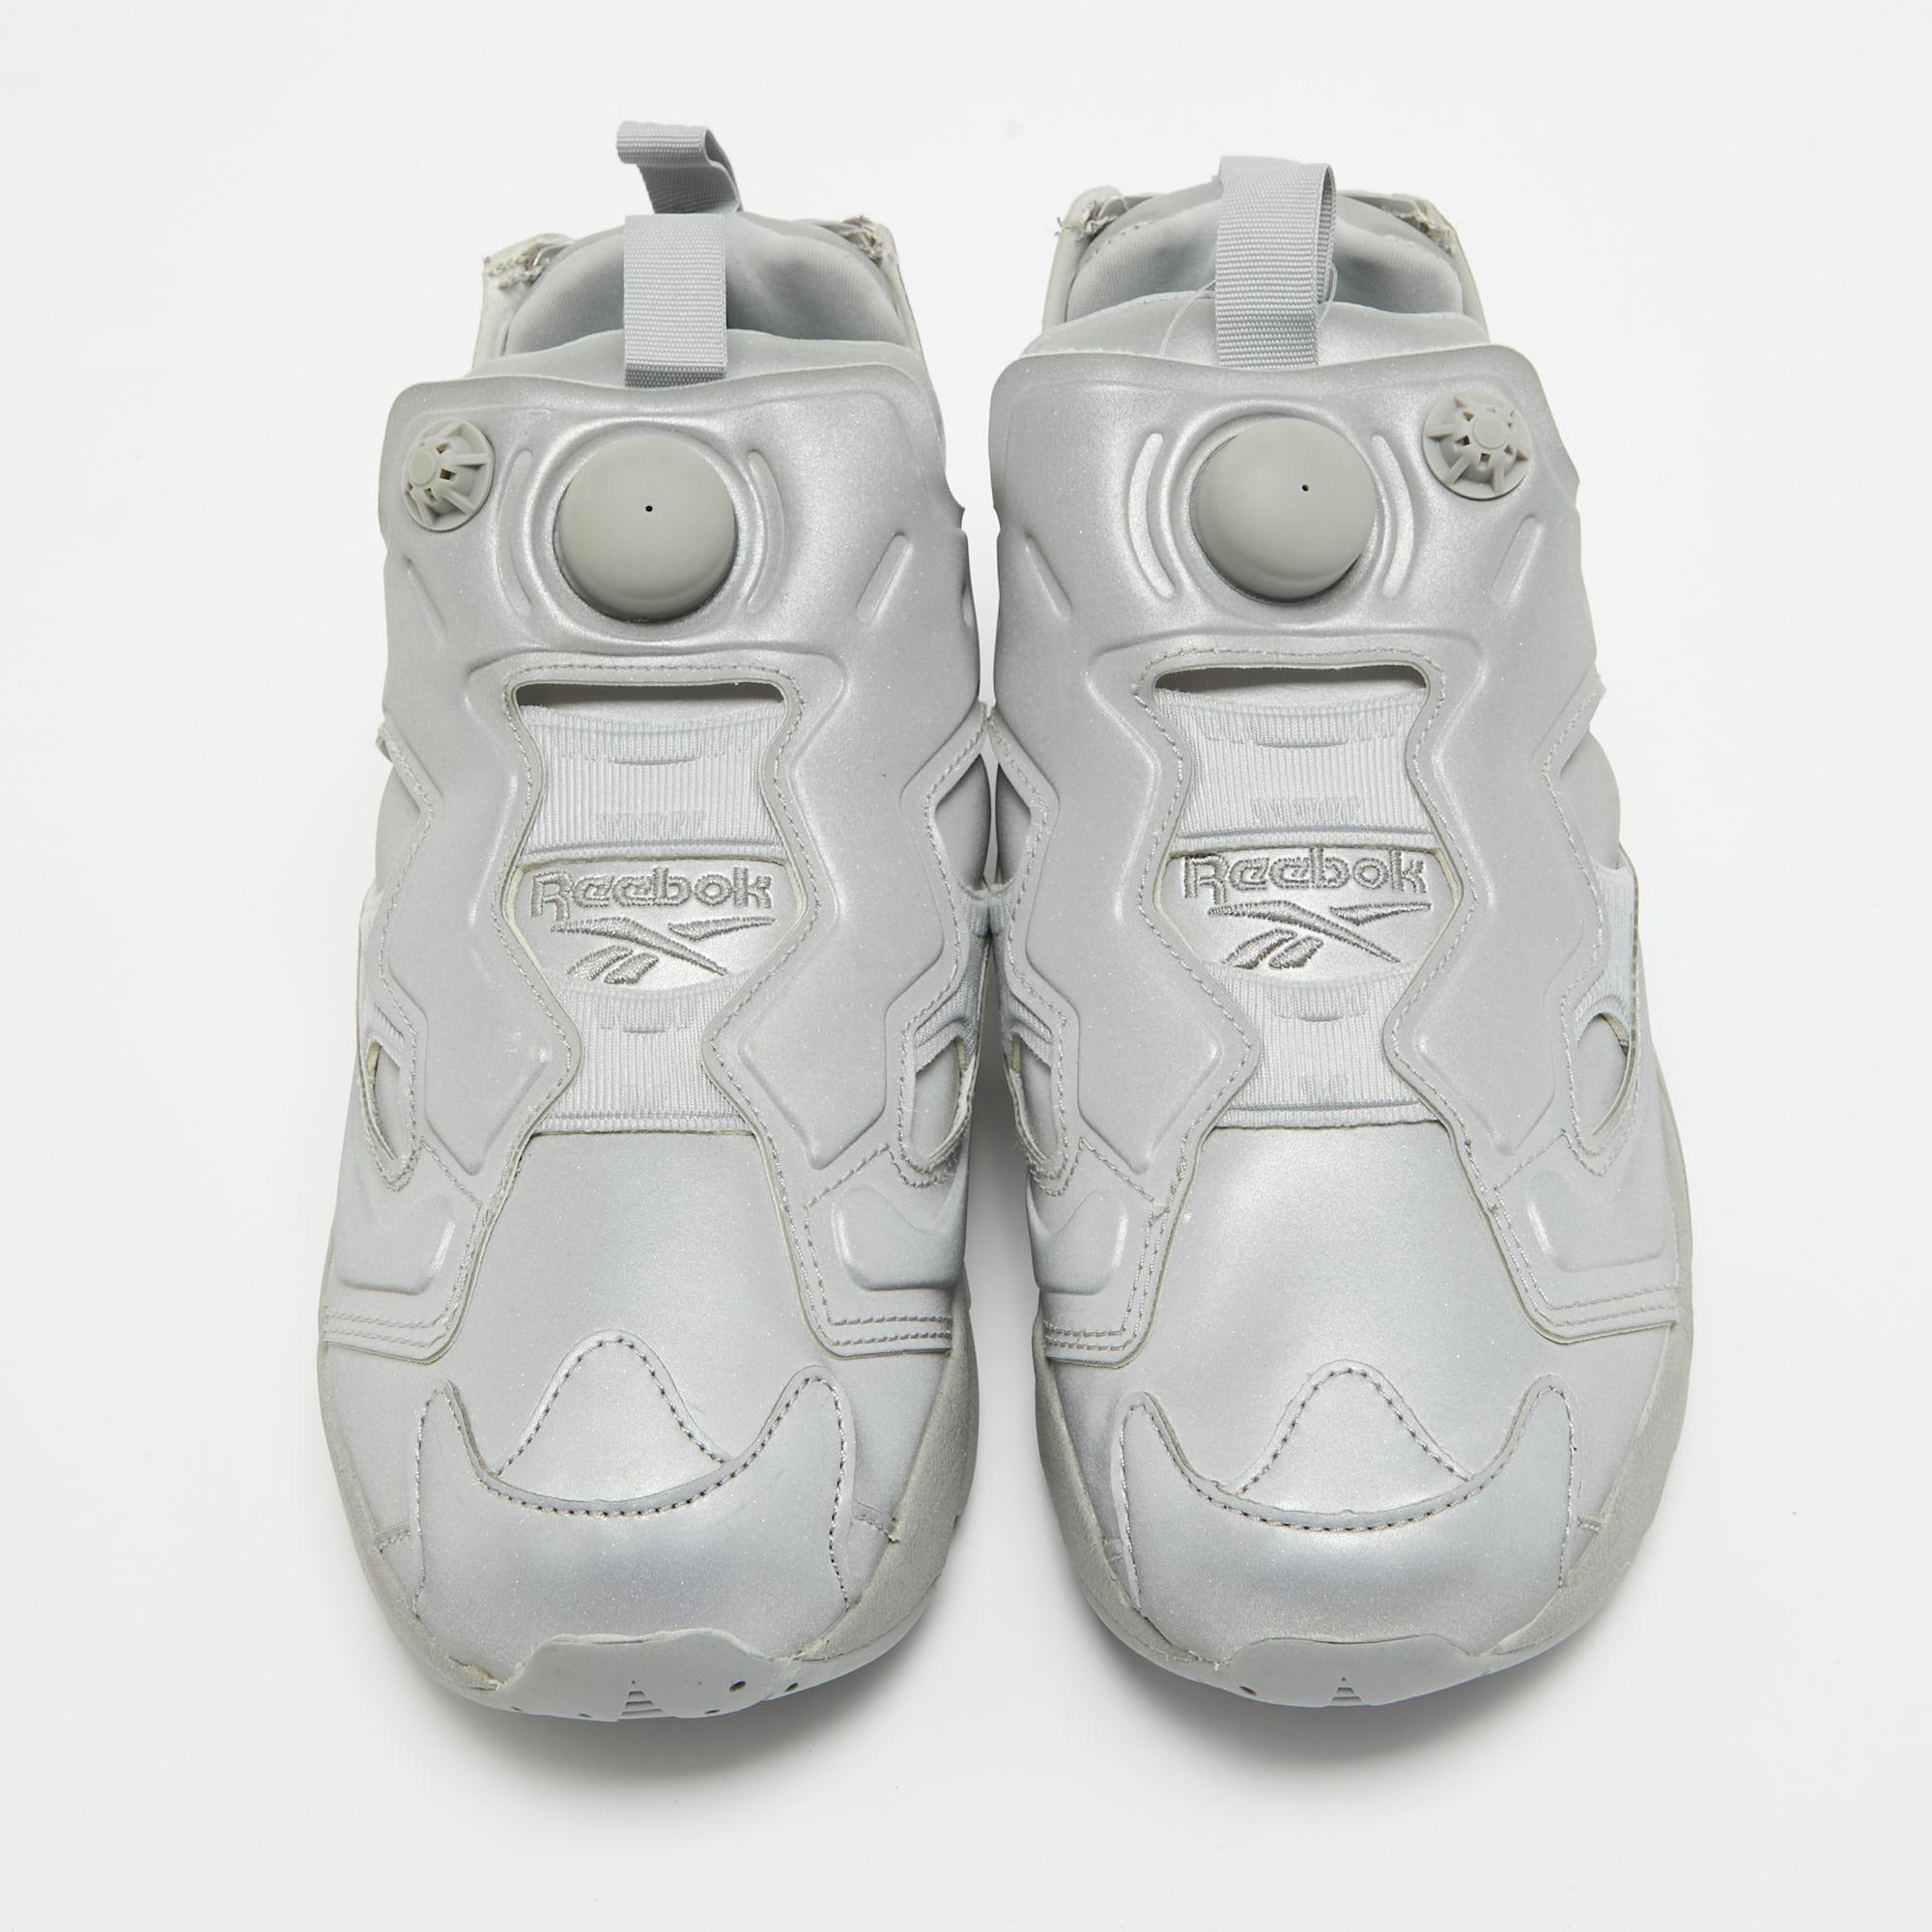 These chic sneakers are born from the Vetements x Reebok collaboration, taking into account both the brand's aesthetics. The grey reflective fabric construction takes the form of round toes and features the Reebok logo on the vamps as well as the